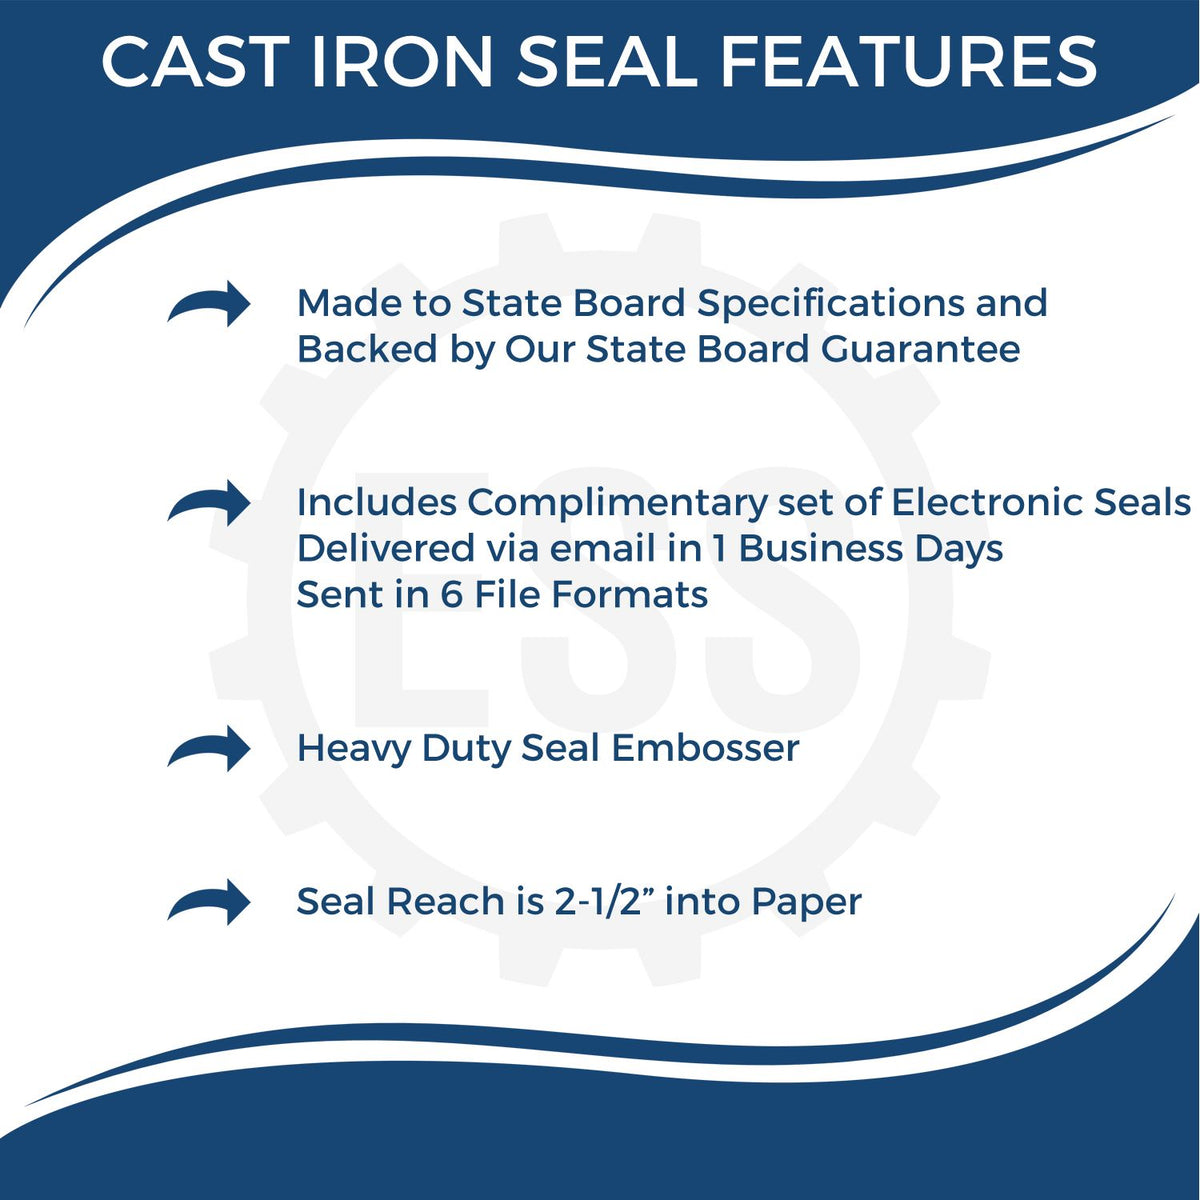 A picture of an infographic highlighting the selling points for the Heavy Duty Cast Iron Illinois Engineer Seal Embosser